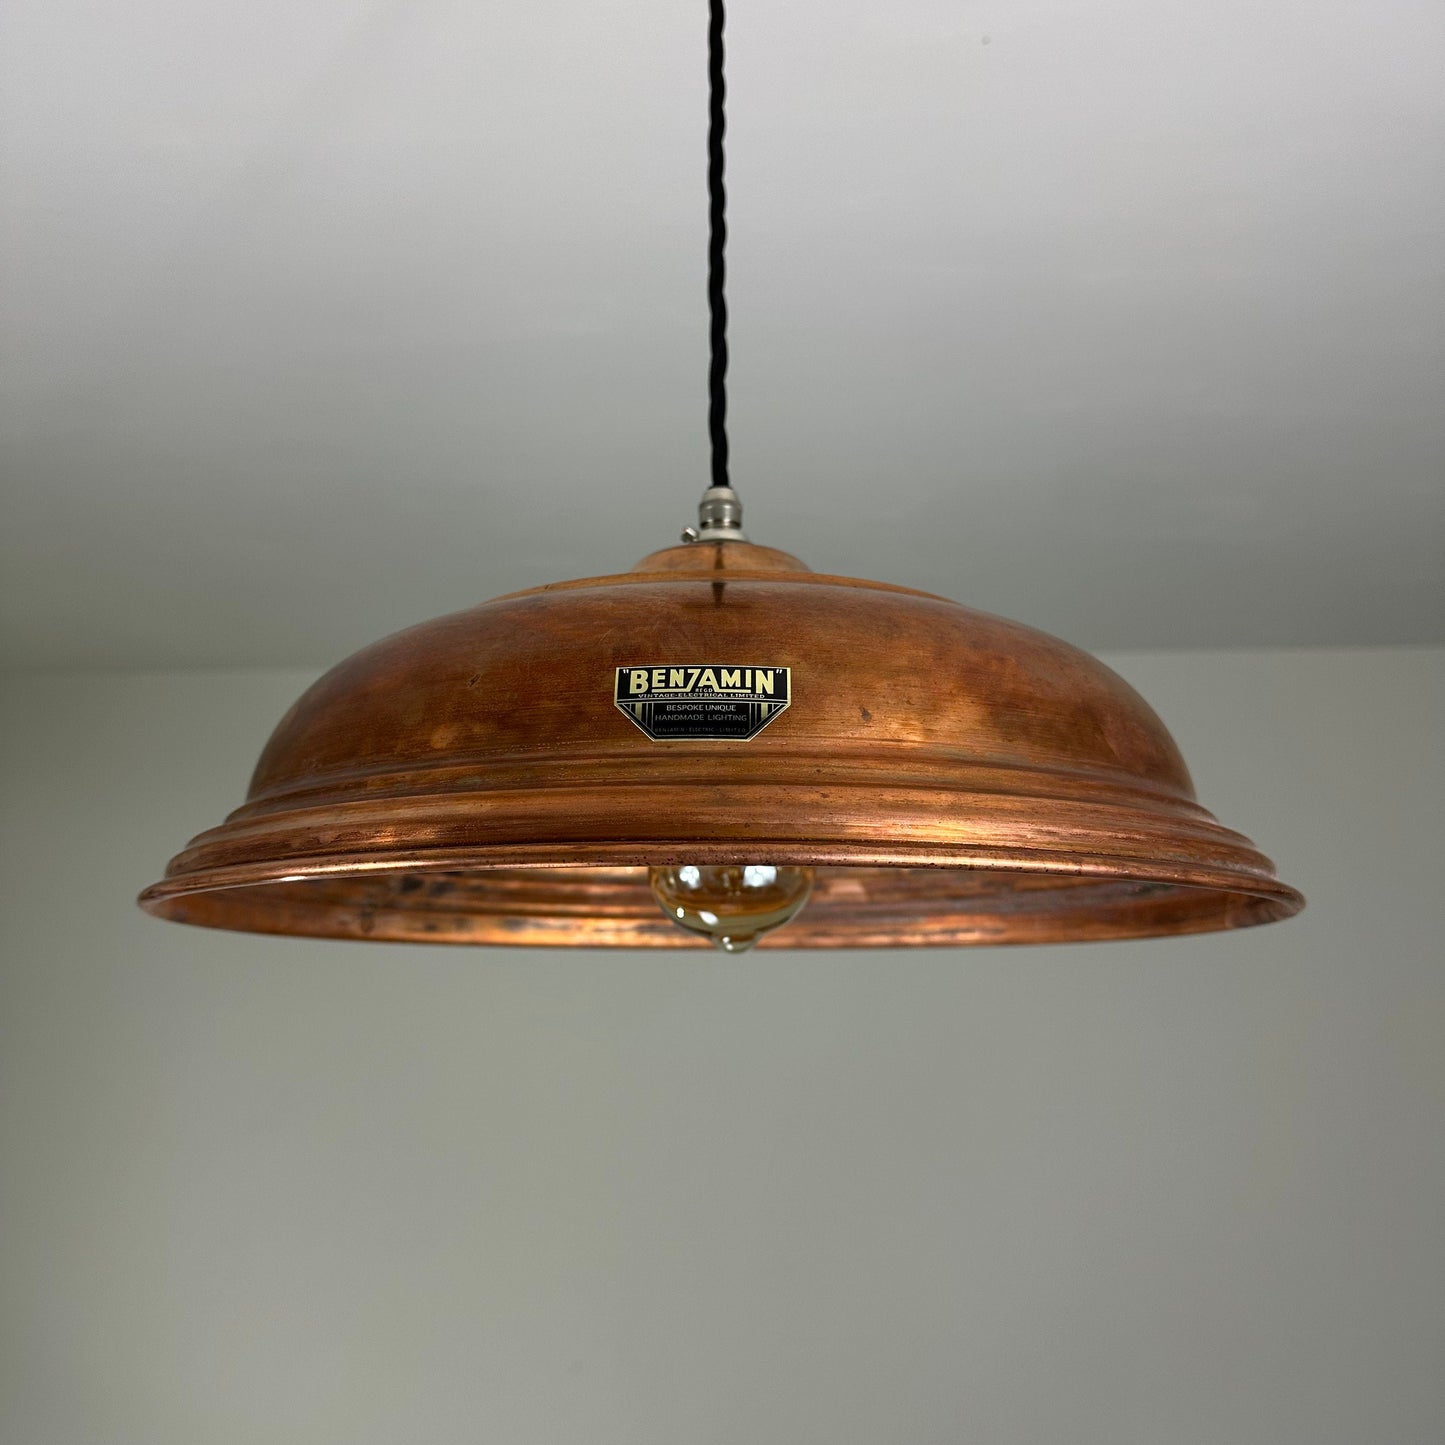 Brancaster ~ Antique Copper Industrial Shade Light | Ceiling Dining Room | Kitchen Table | Vintage